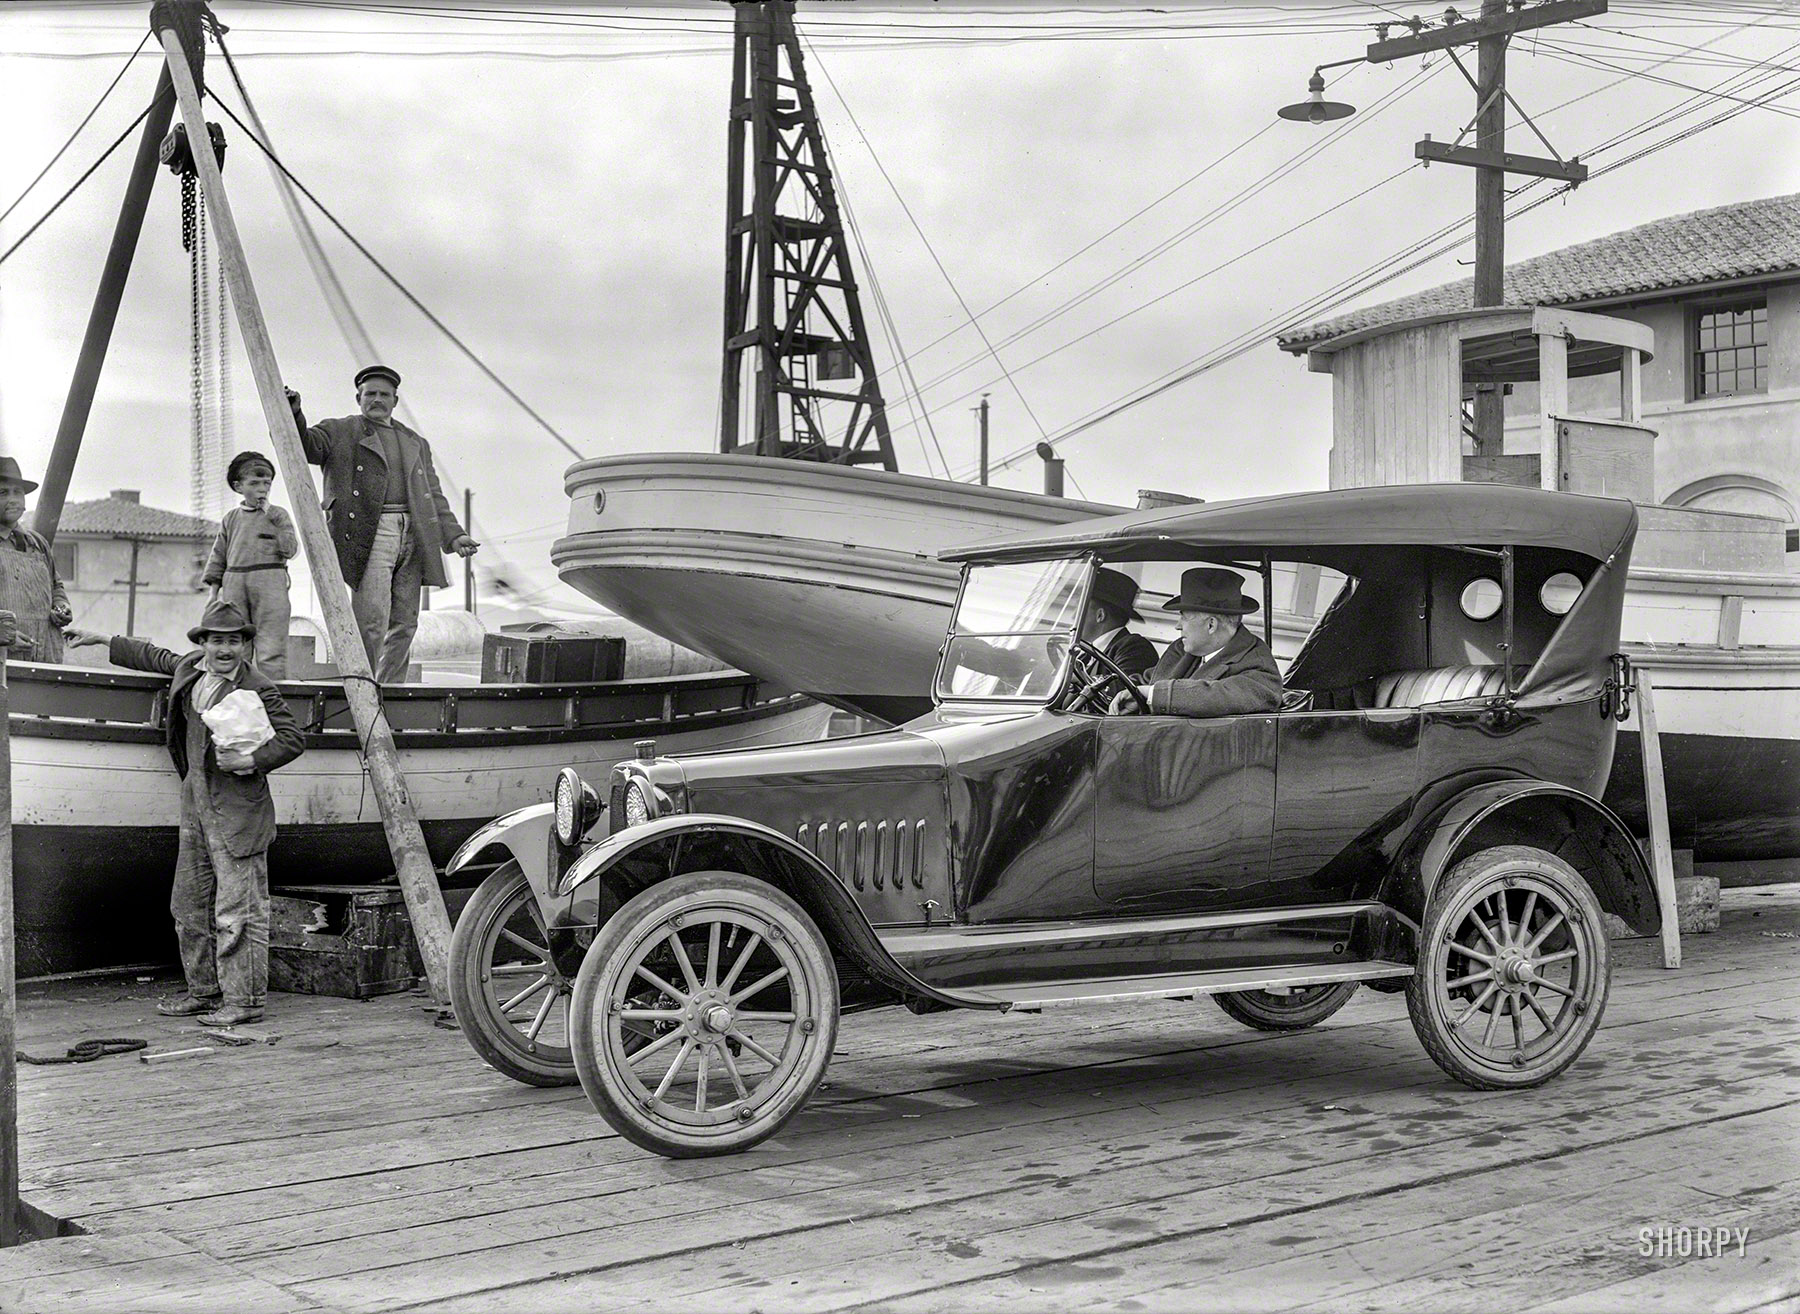 San Francisco, 1921. "Saxon auto and fishing boats." Another automotive brand not long for this earth. 5x7 glass negative by Christopher Helin. View full size.